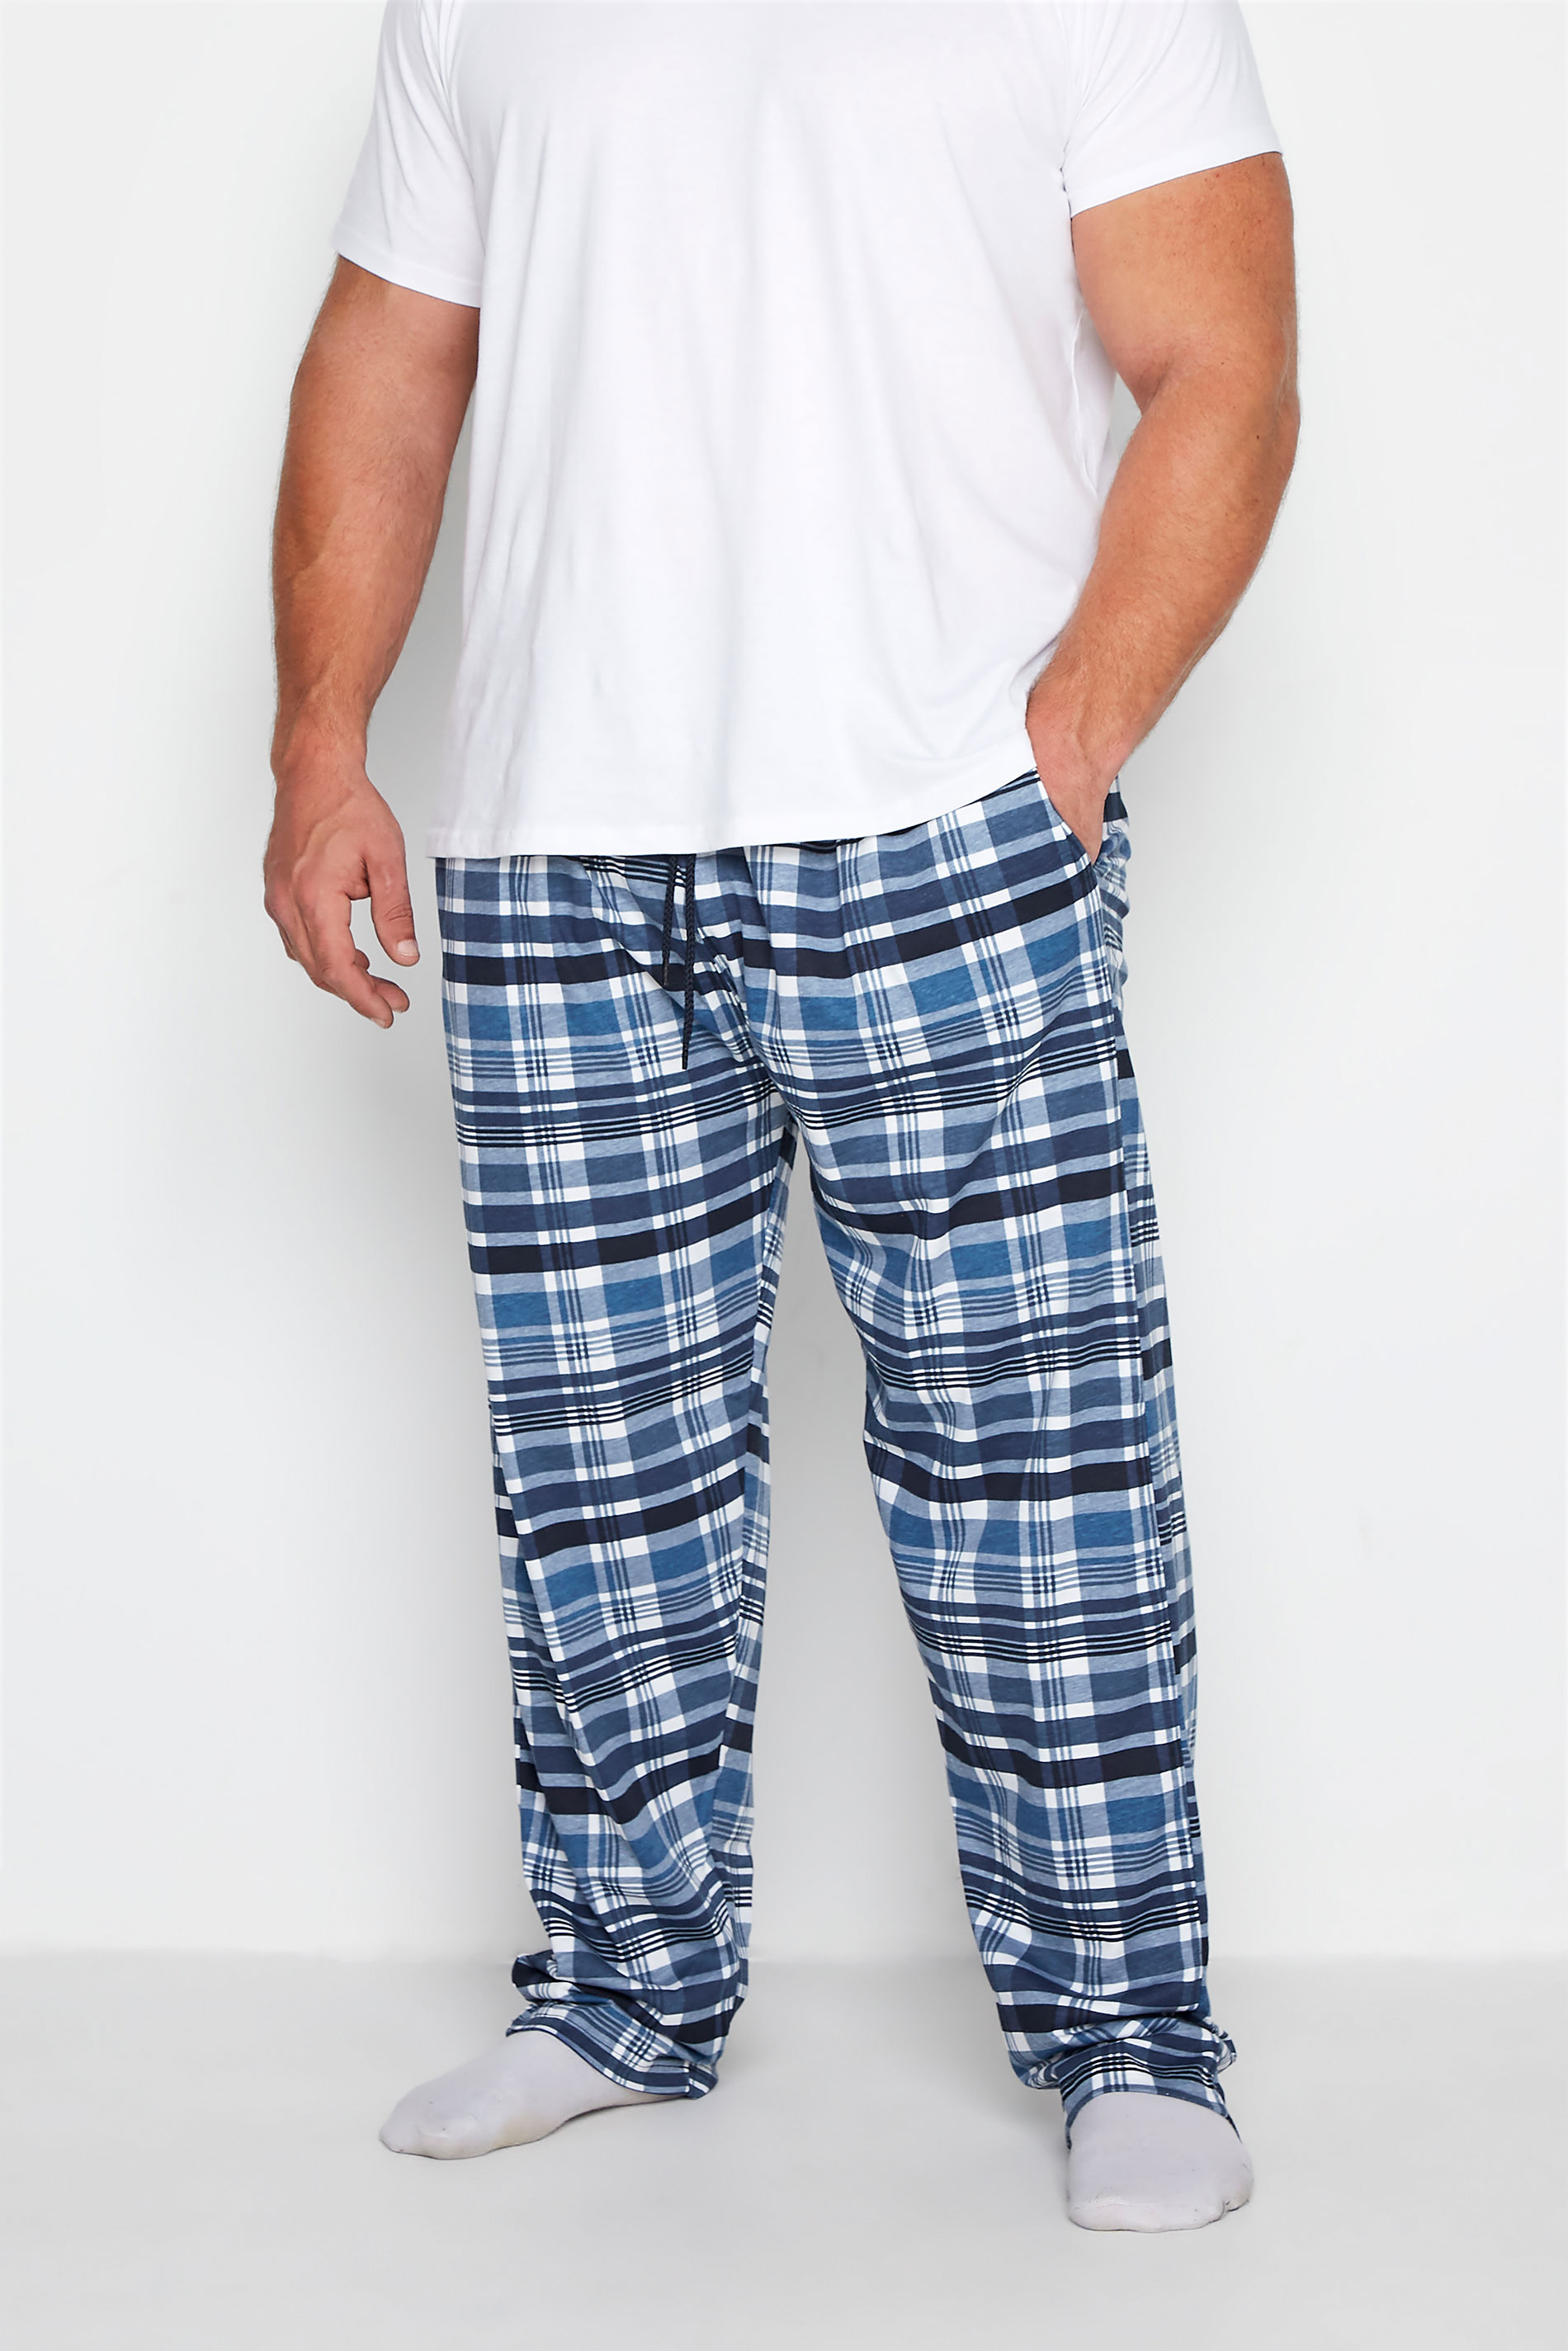 KAM 2 PACK Navy & Check Lounge Bottoms_A.jpg